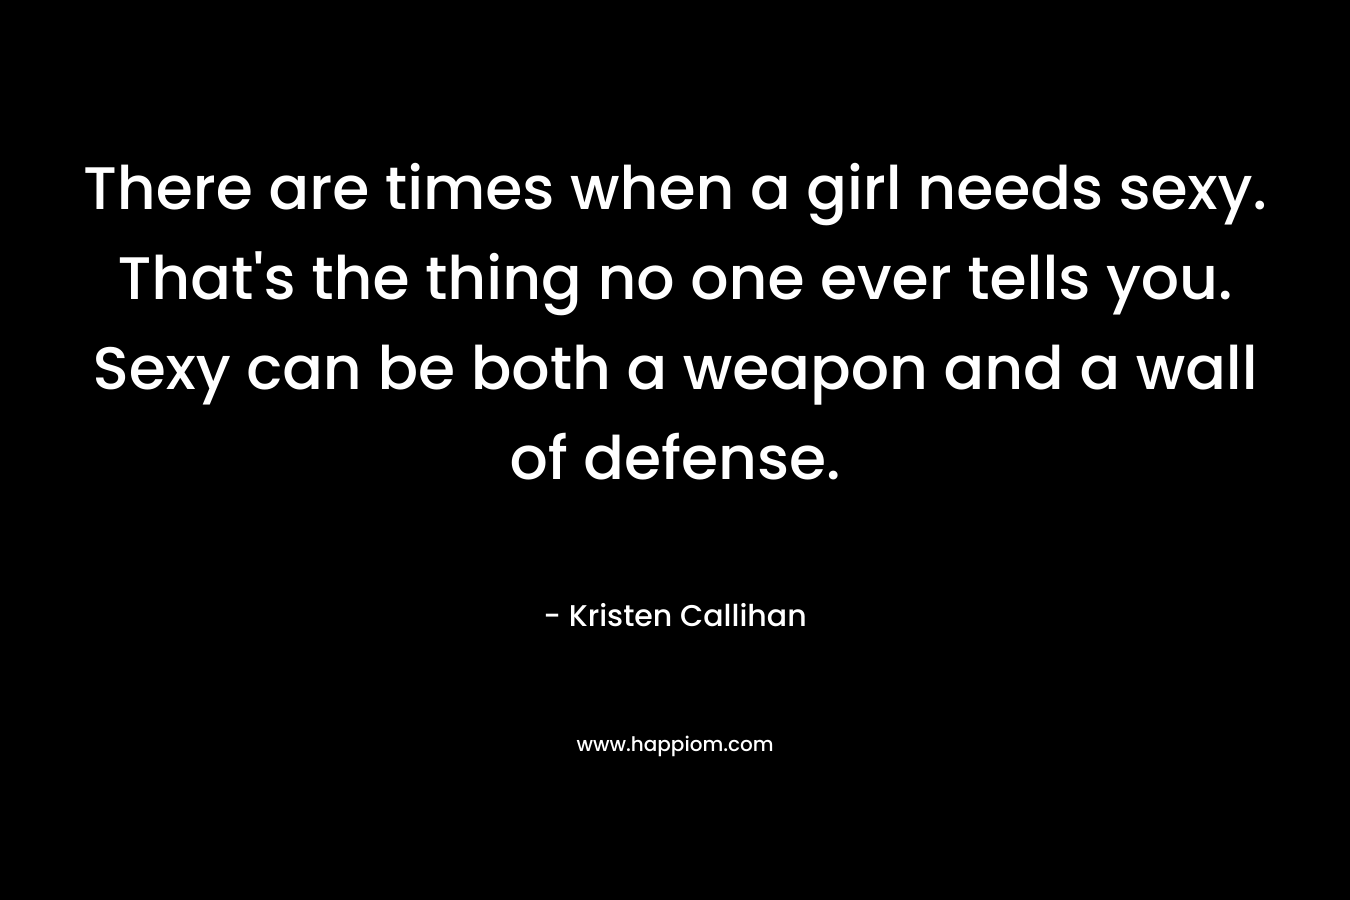 There are times when a girl needs sexy. That’s the thing no one ever tells you. Sexy can be both a weapon and a wall of defense. – Kristen Callihan